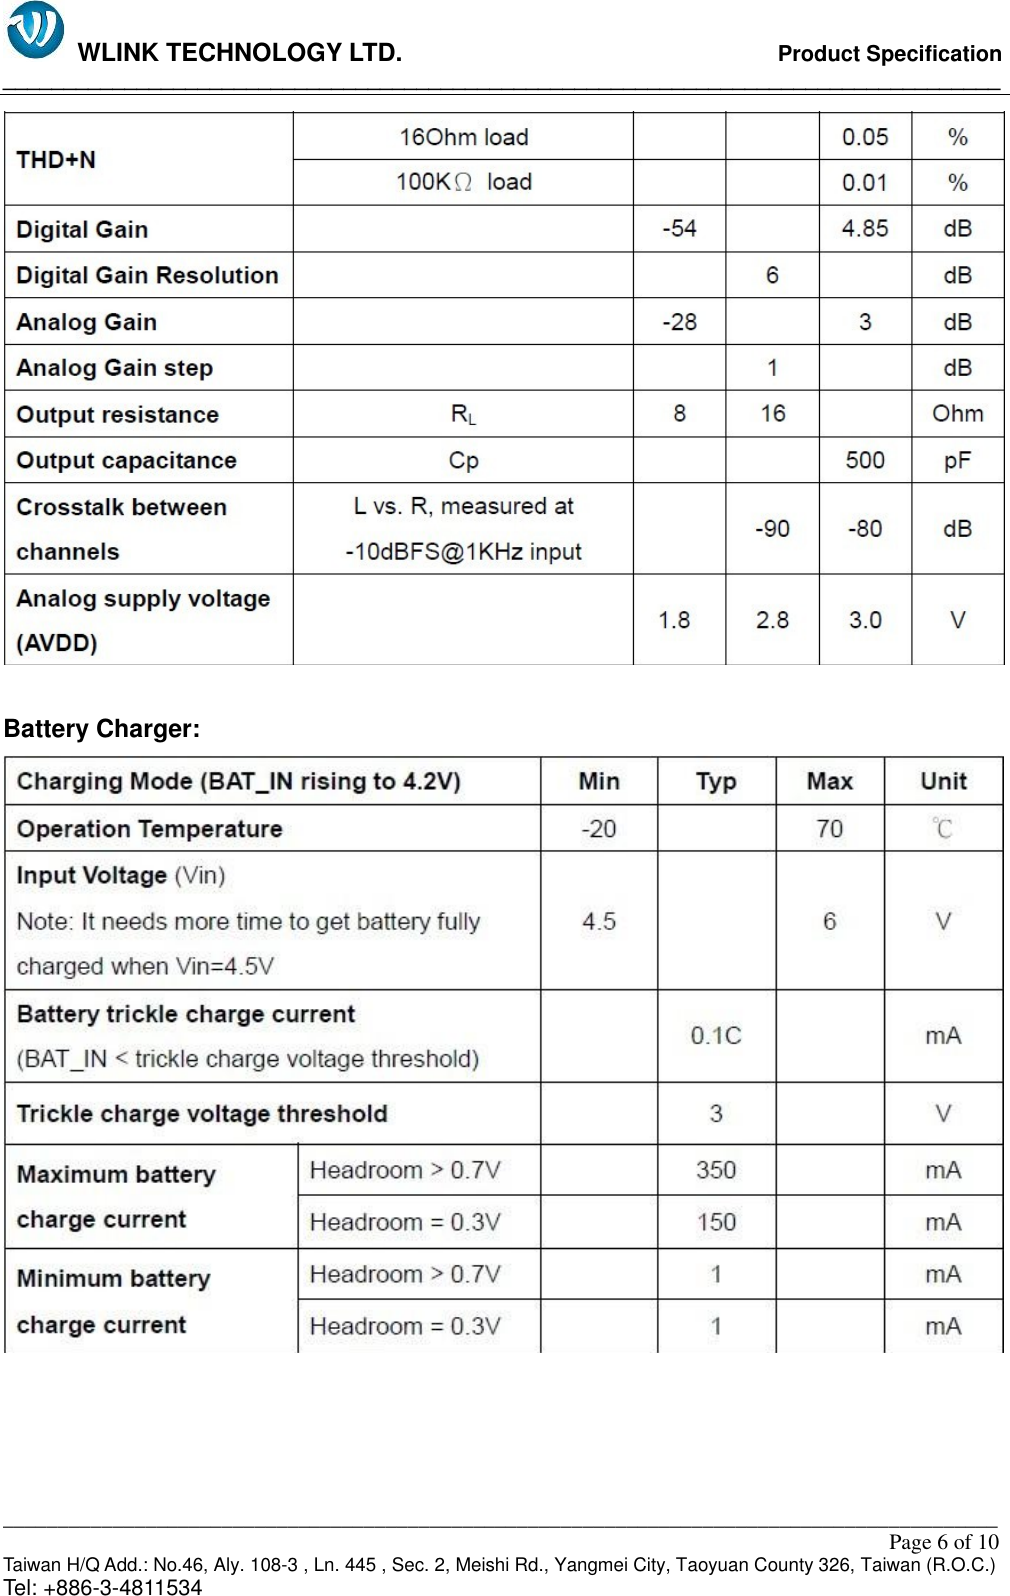   WLINK TECHNOLOGY LTD.                              Product Specification __________________________________________________________________________________ ___________________________________________________________________________________________                                                                                                                                                         Page 6 of 10 Taiwan H/Q Add.: No.46, Aly. 108-3 , Ln. 445 , Sec. 2, Meishi Rd., Yangmei City, Taoyuan County 326, Taiwan (R.O.C.)   Tel: +886-3-4811534   Battery Charger:     